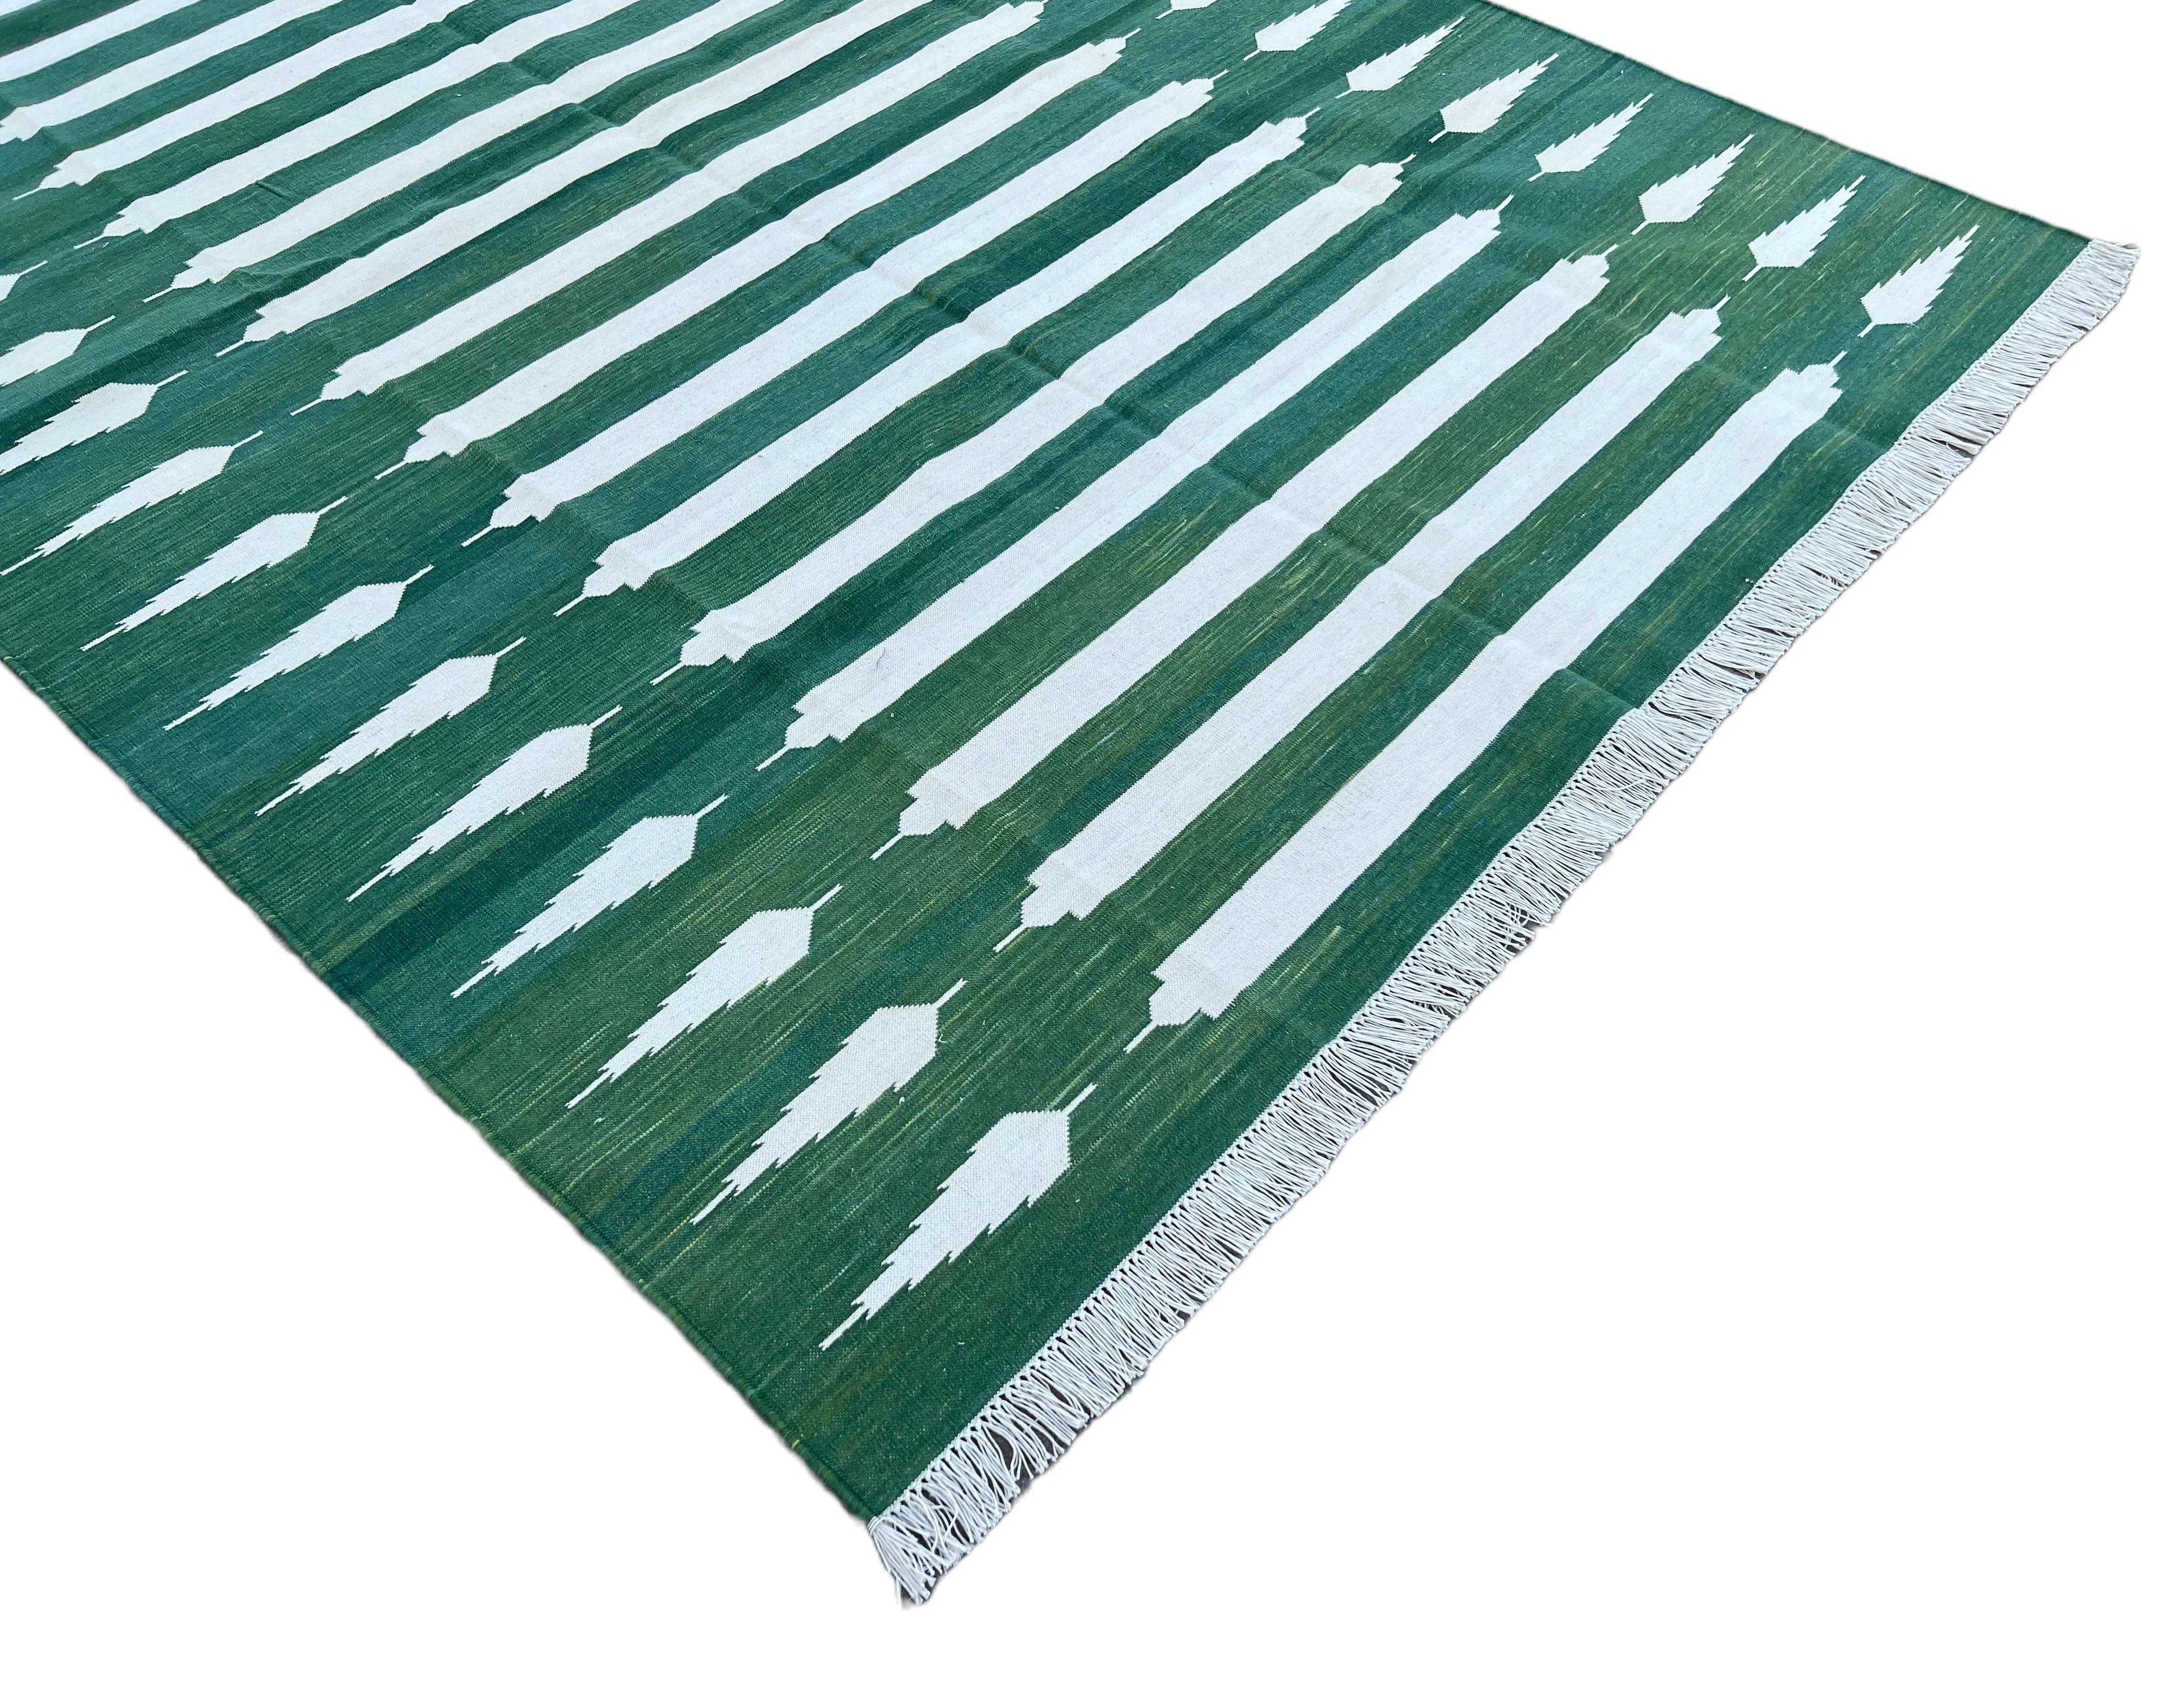 Contemporary Handmade Cotton Area Flat Weave Rug, Green And White Striped Indian Dhurrie Rug For Sale